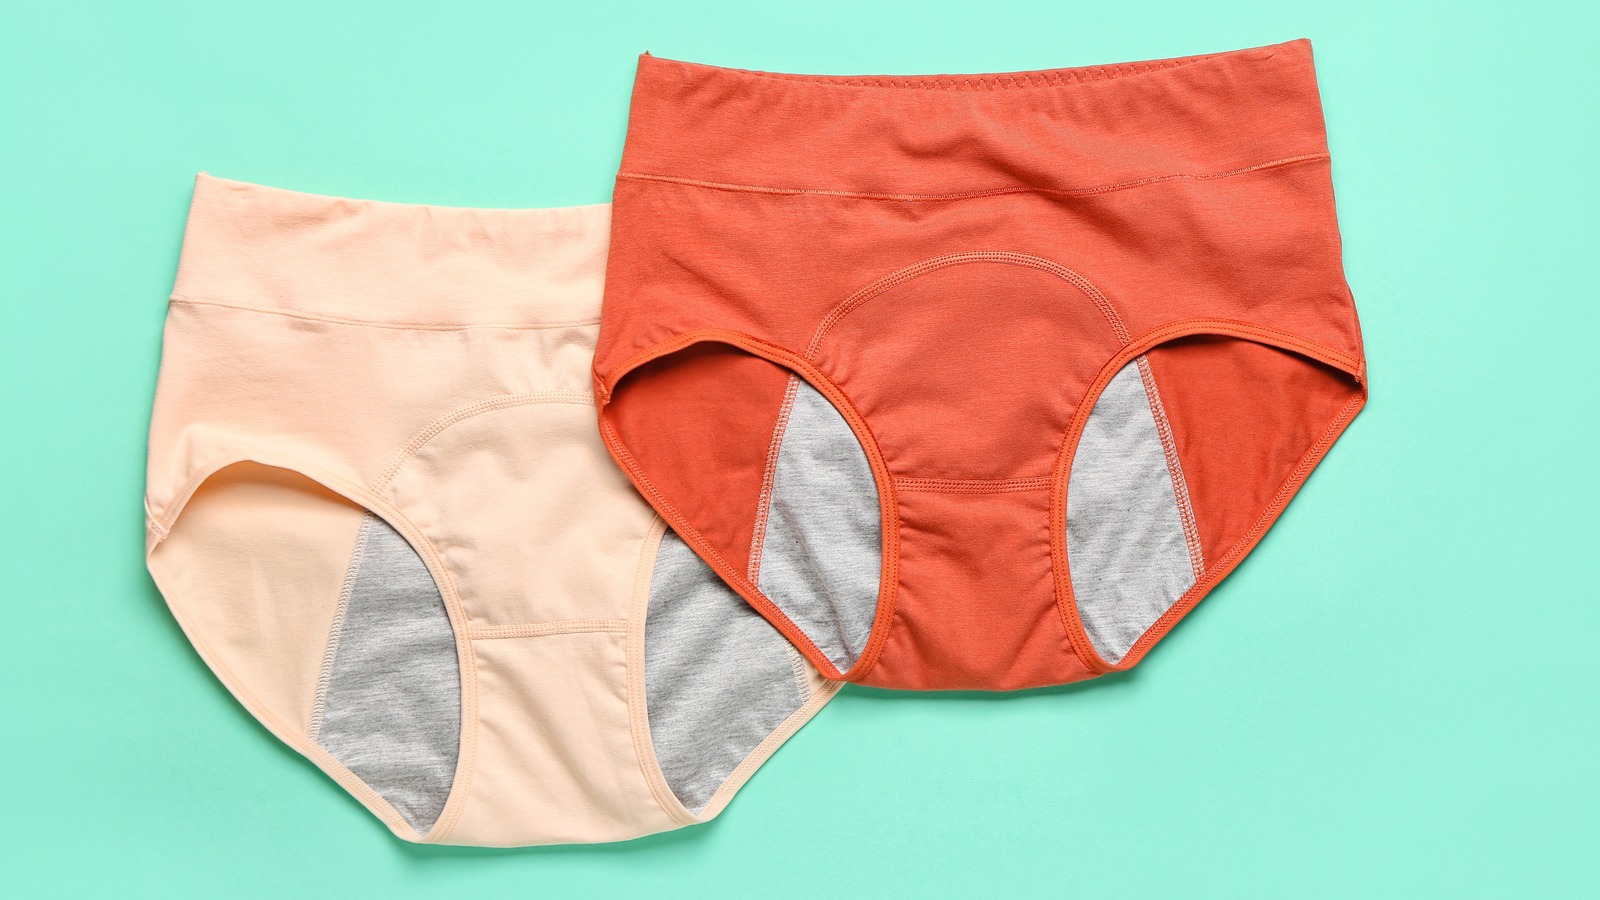 https://www.thelist.com/img/gallery/what-we-know-about-the-thinx-underwear-lawsuit-and-how-it-may-affect-you/l-intro-1674157232.jpg